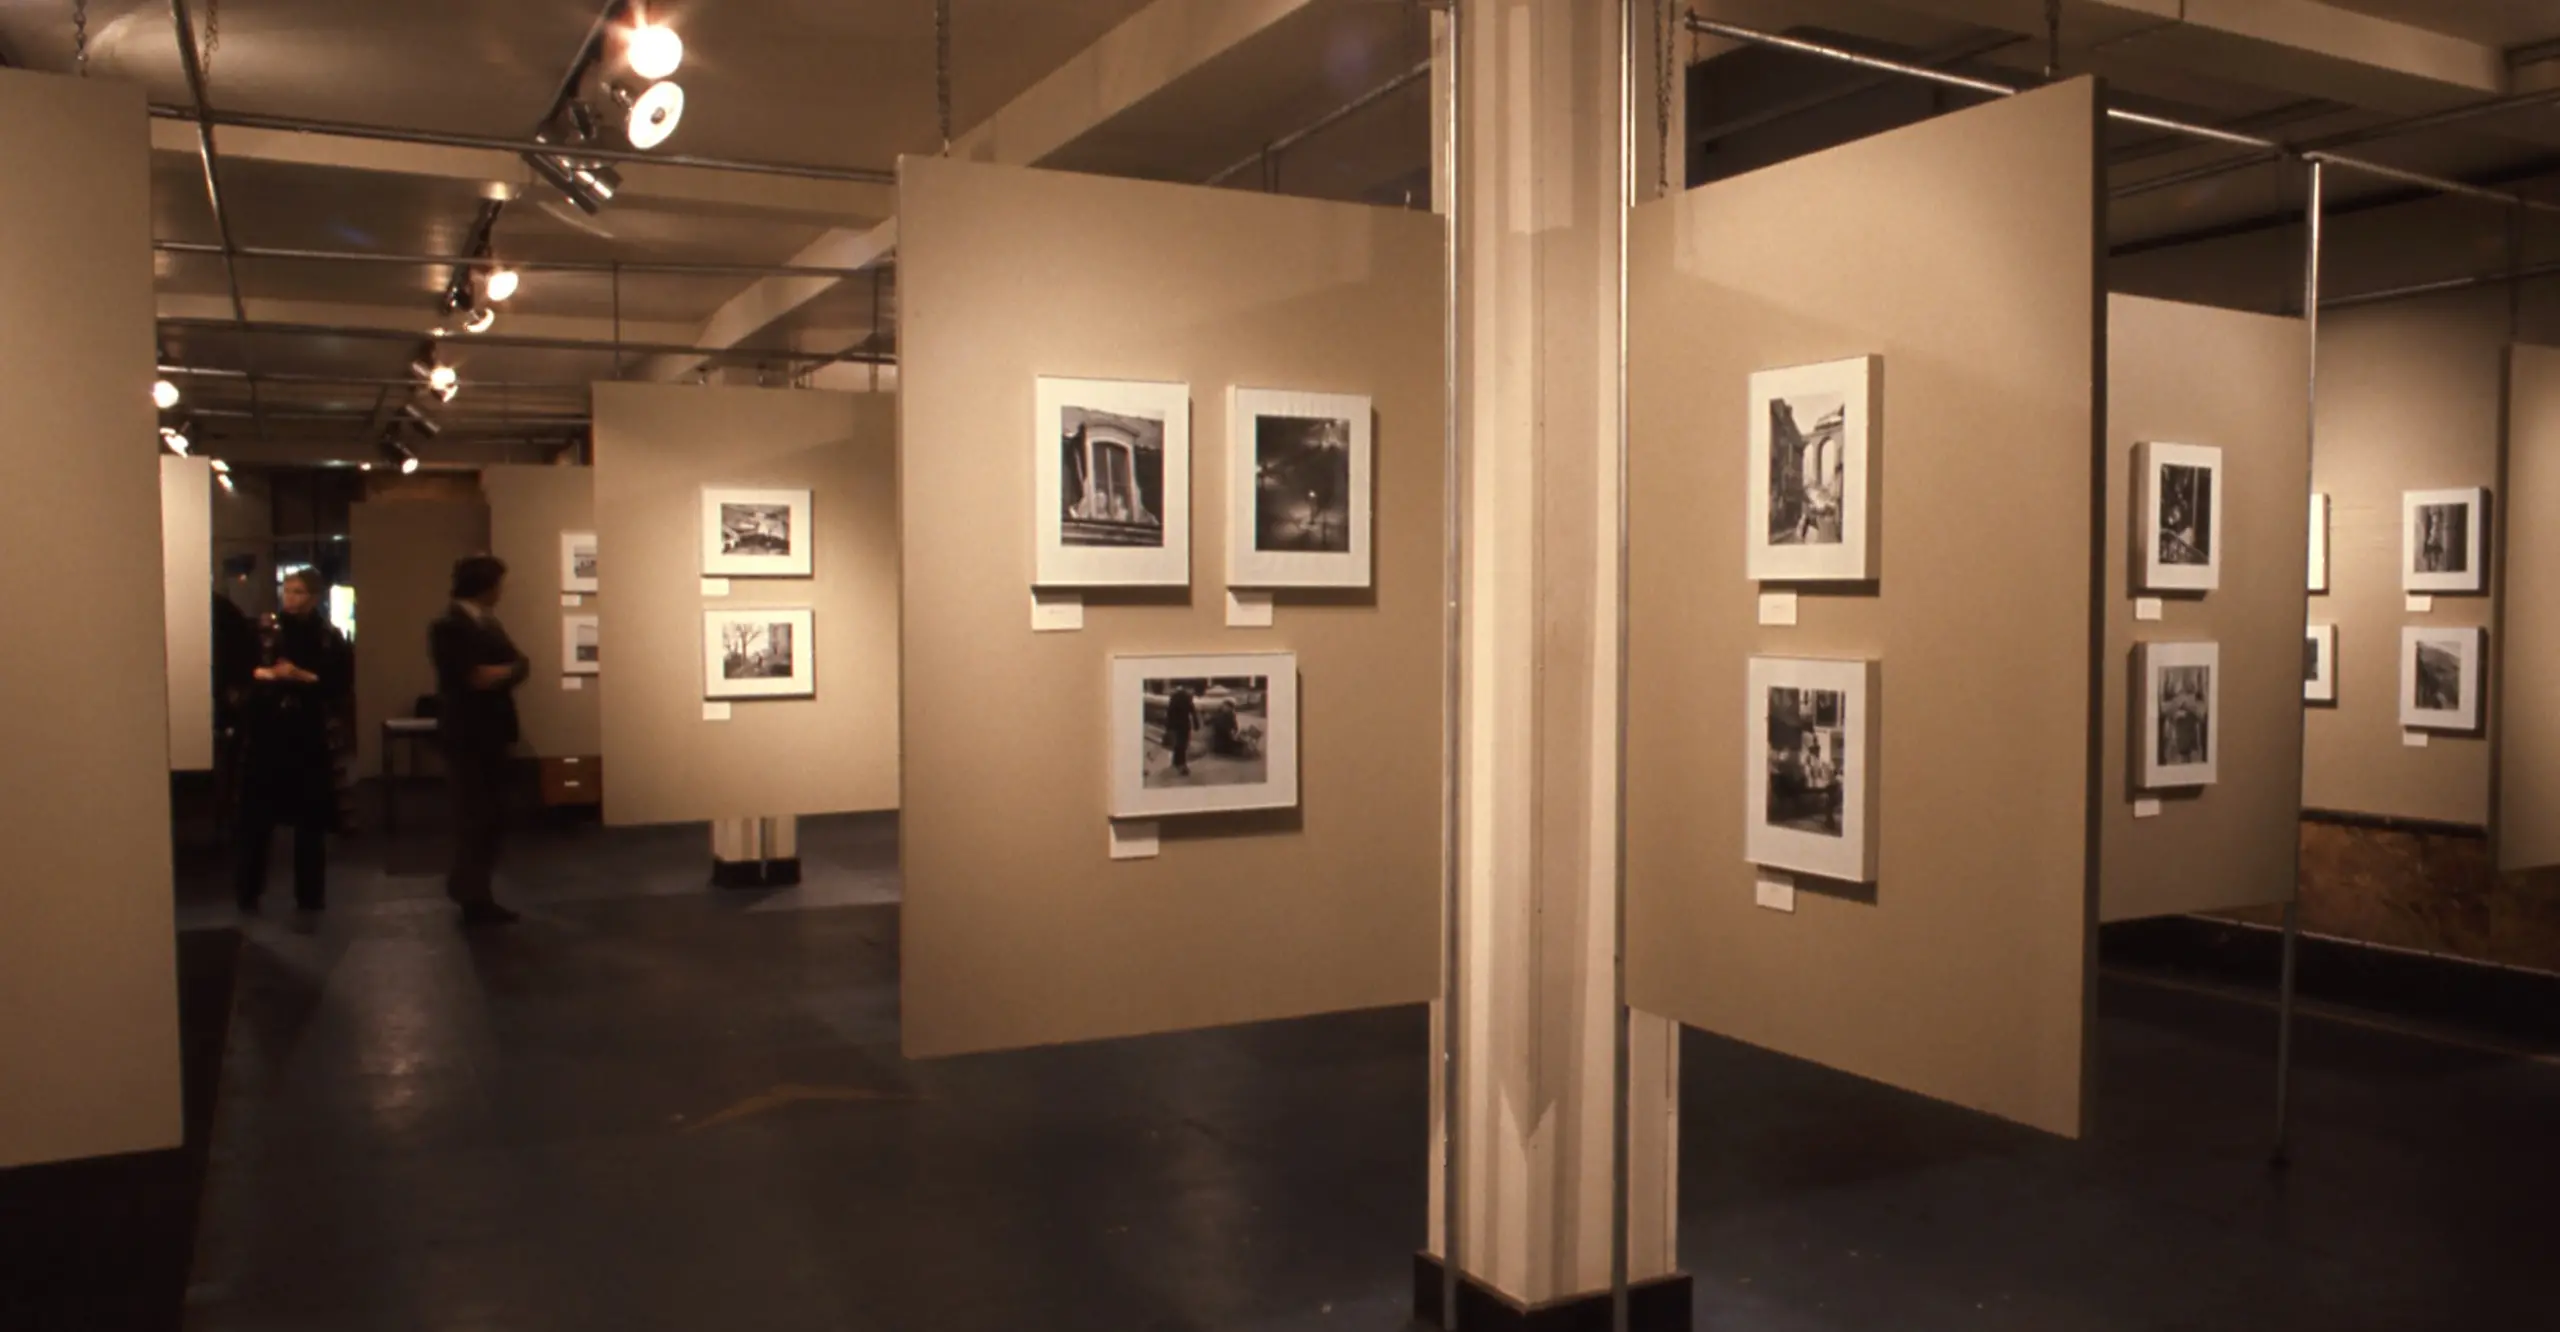 Andre Kertesz: Sixty Years of Photography 1912-1972, 1972, installation Image. Courtesy The Photographers' Gallery Archive